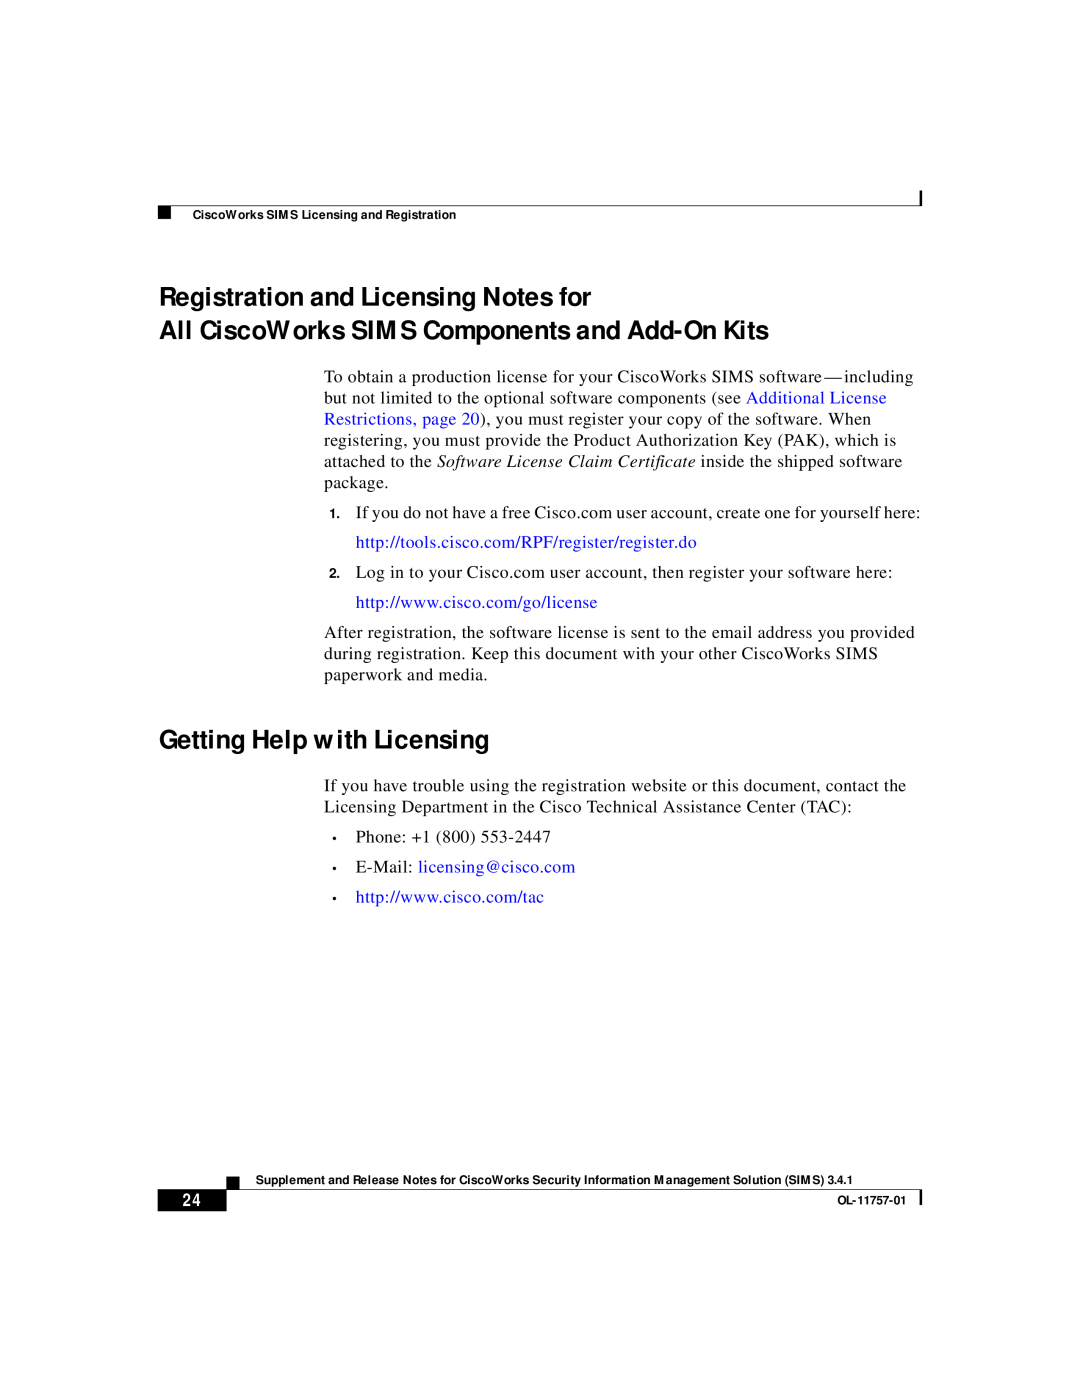 Cisco Systems OL-11757-01 manual Registration and Licensing Notes for, All CiscoWorks SIMS Components and Add-OnKits 